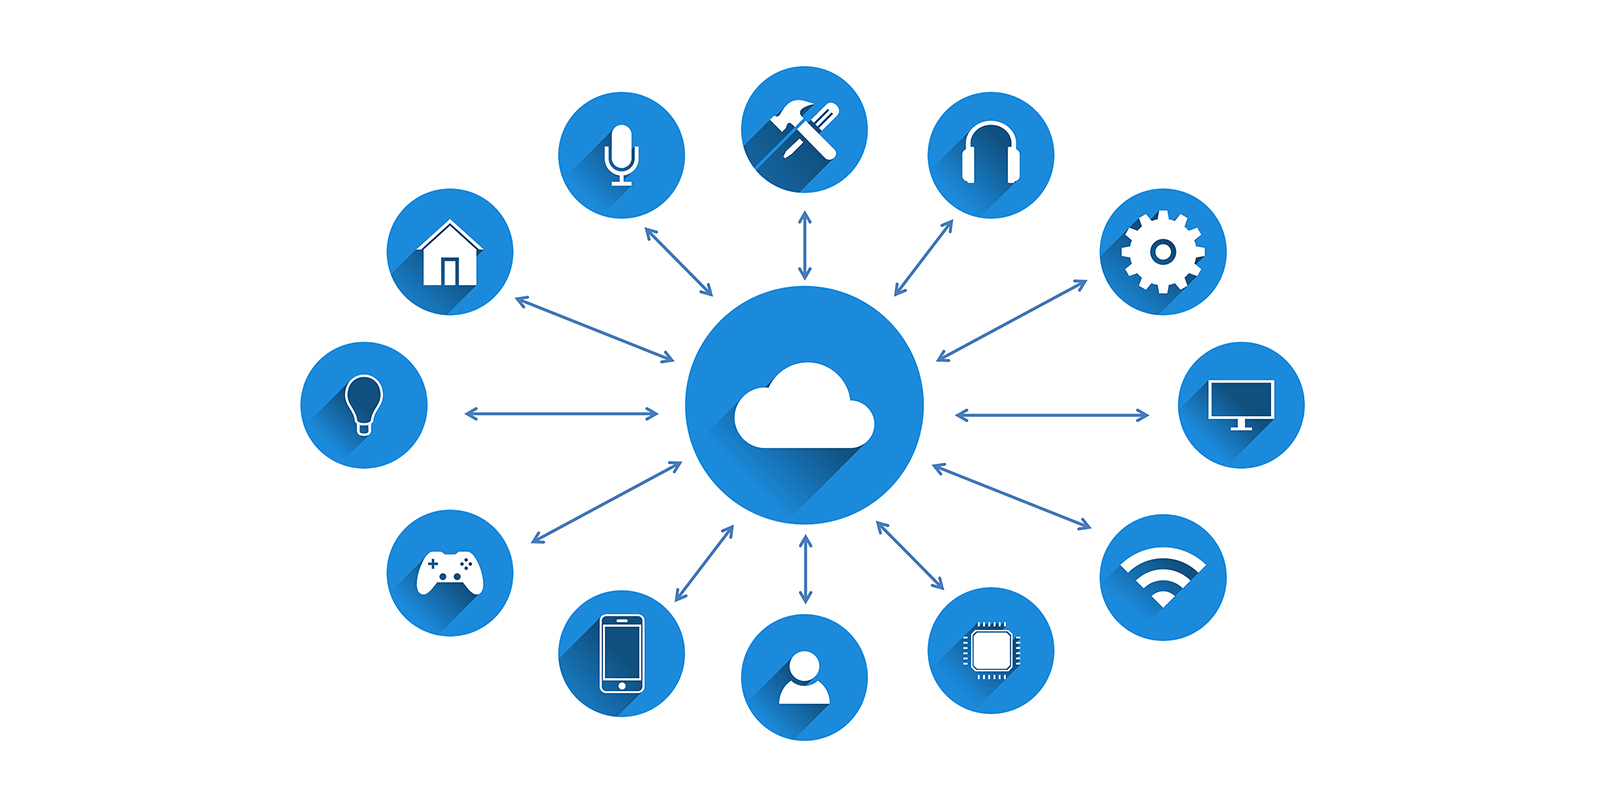 How are devices connected in the Internet Of Things?